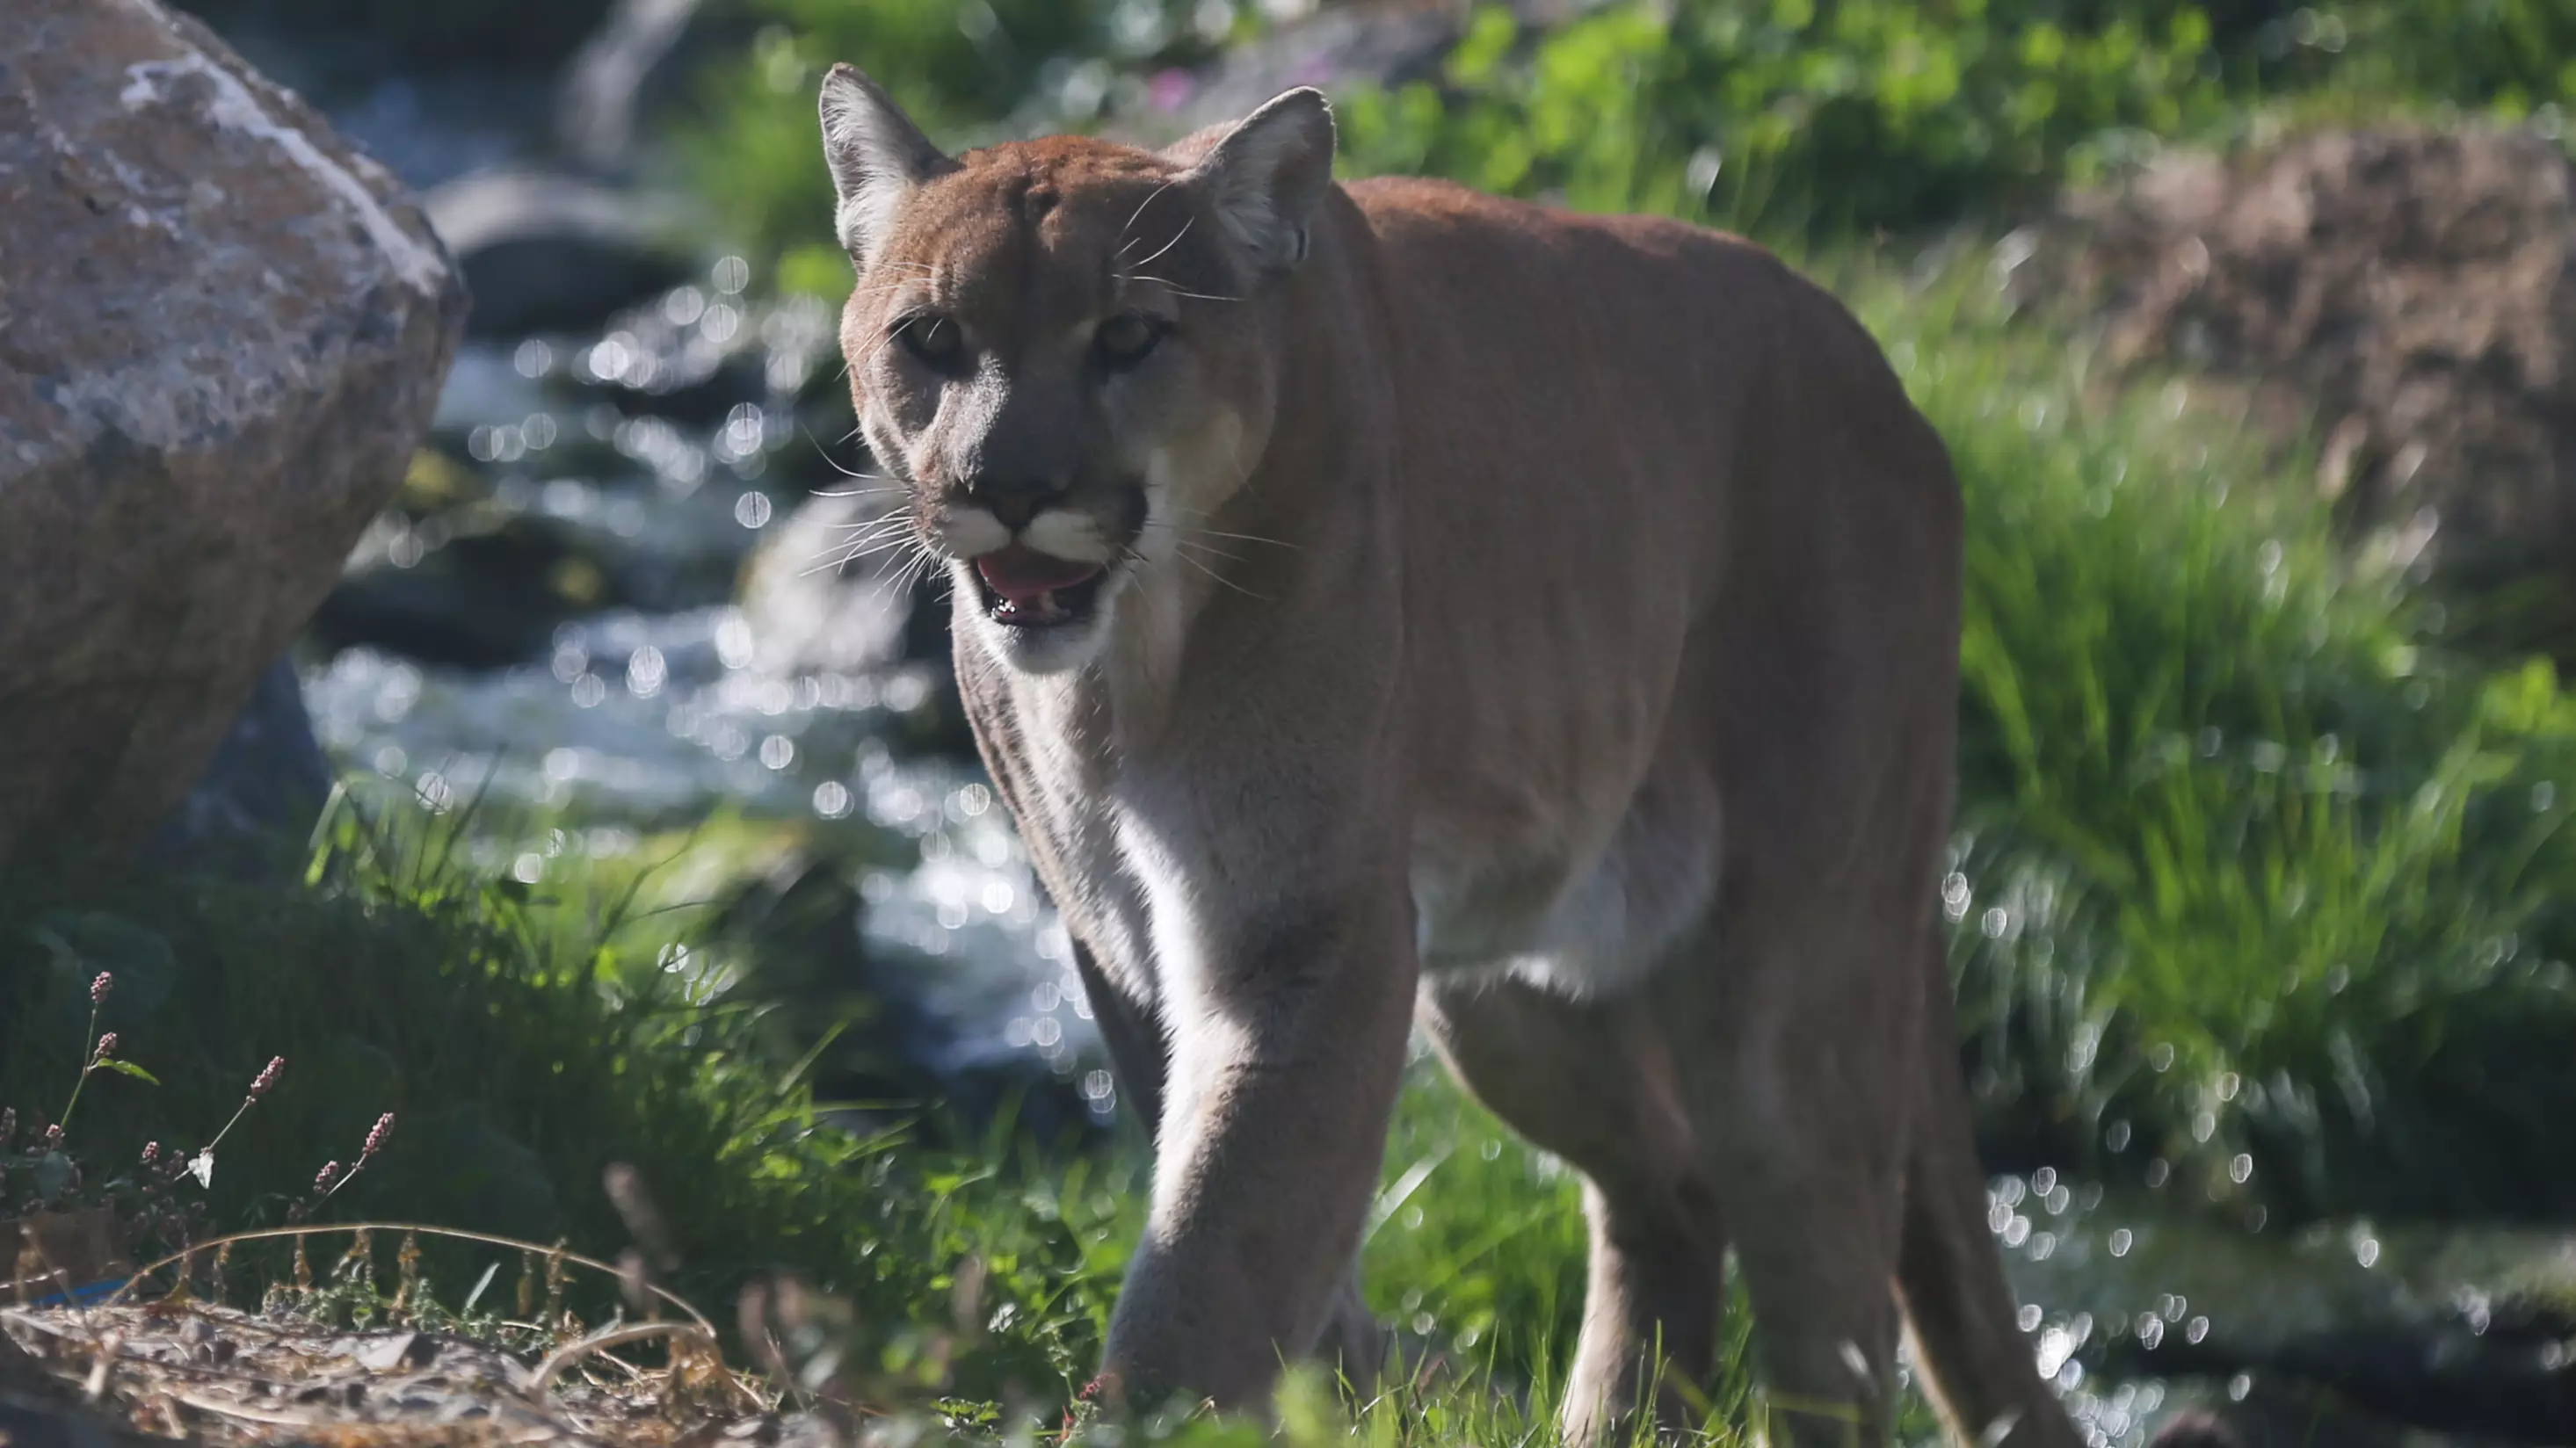 Mum Fights Off Mountain Lion With Her Bare Hands To Save Her Young Son